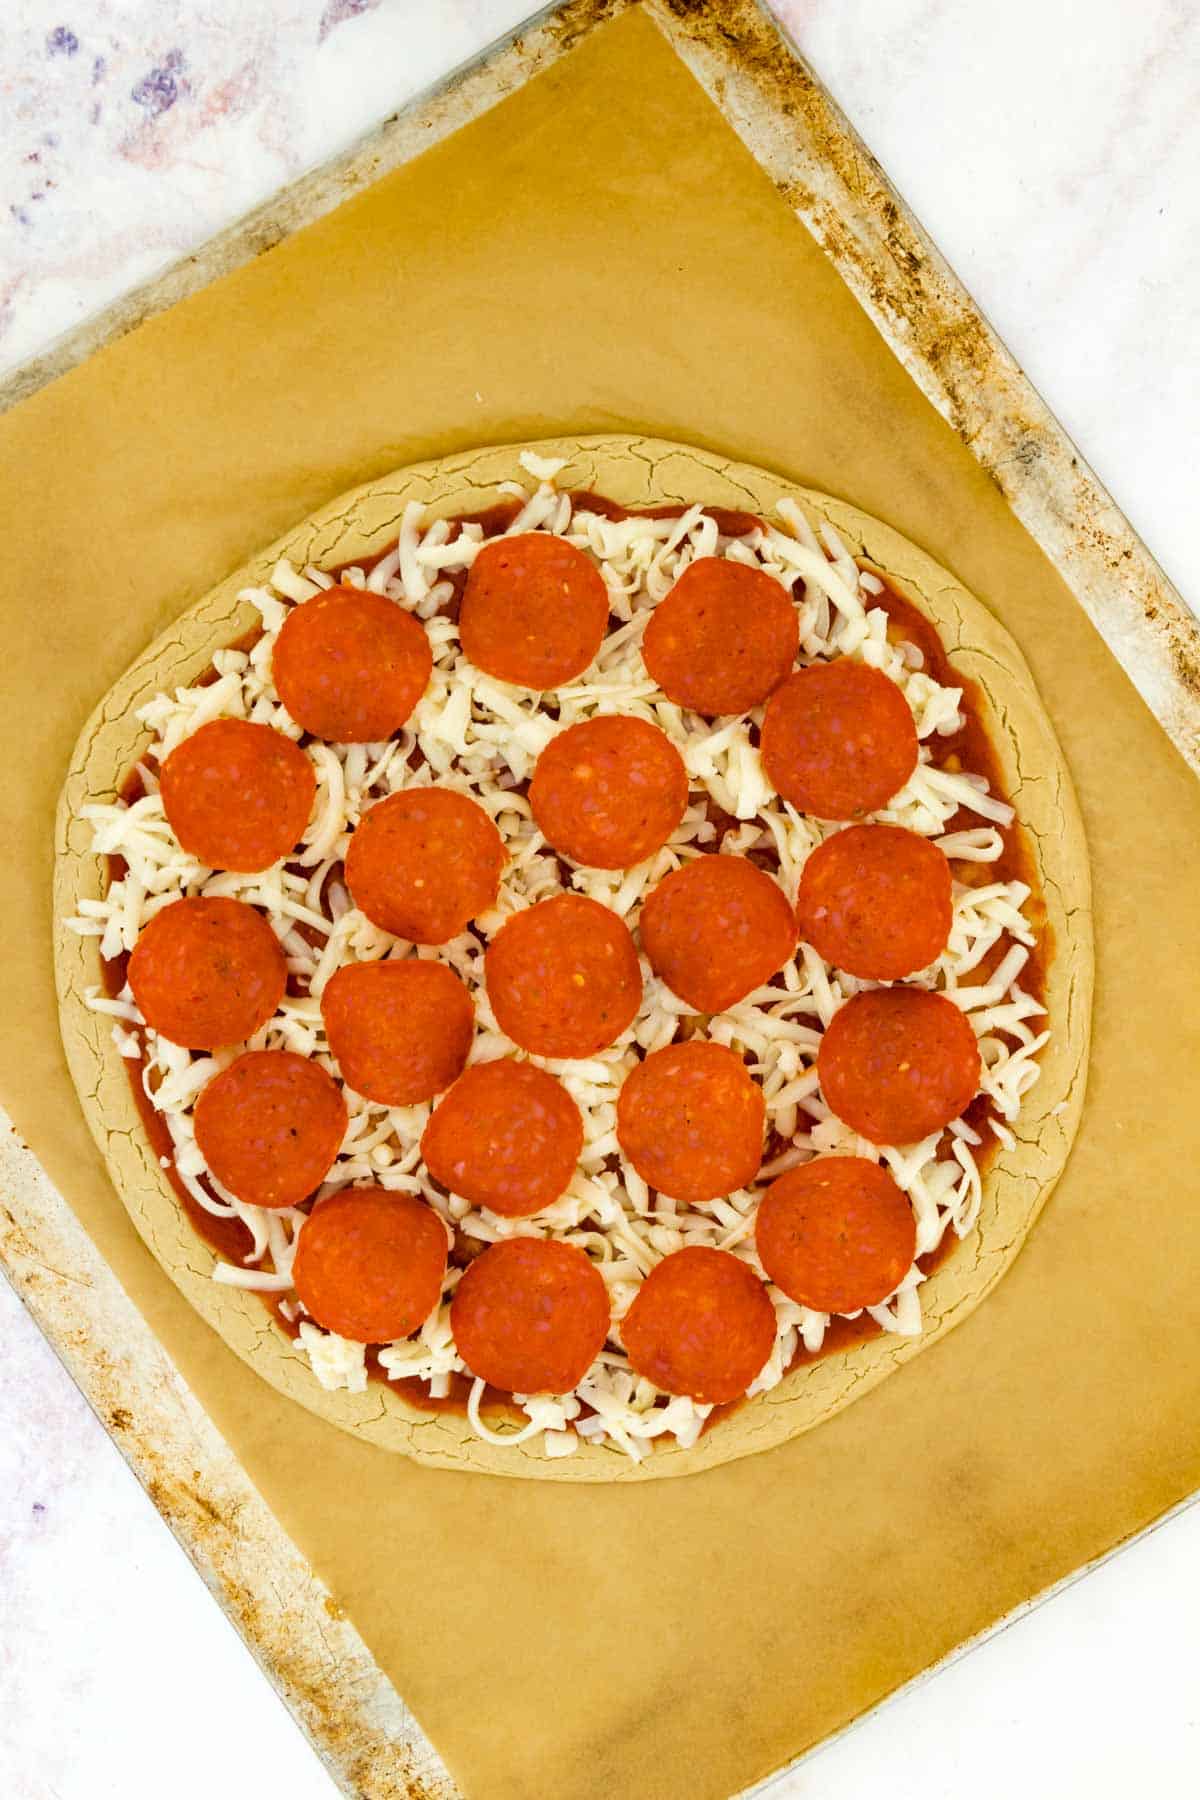 Gluten free pizza crust topped with pizza sauce, cheese, and pepperoni slices on a parchment-lined baking sheet.